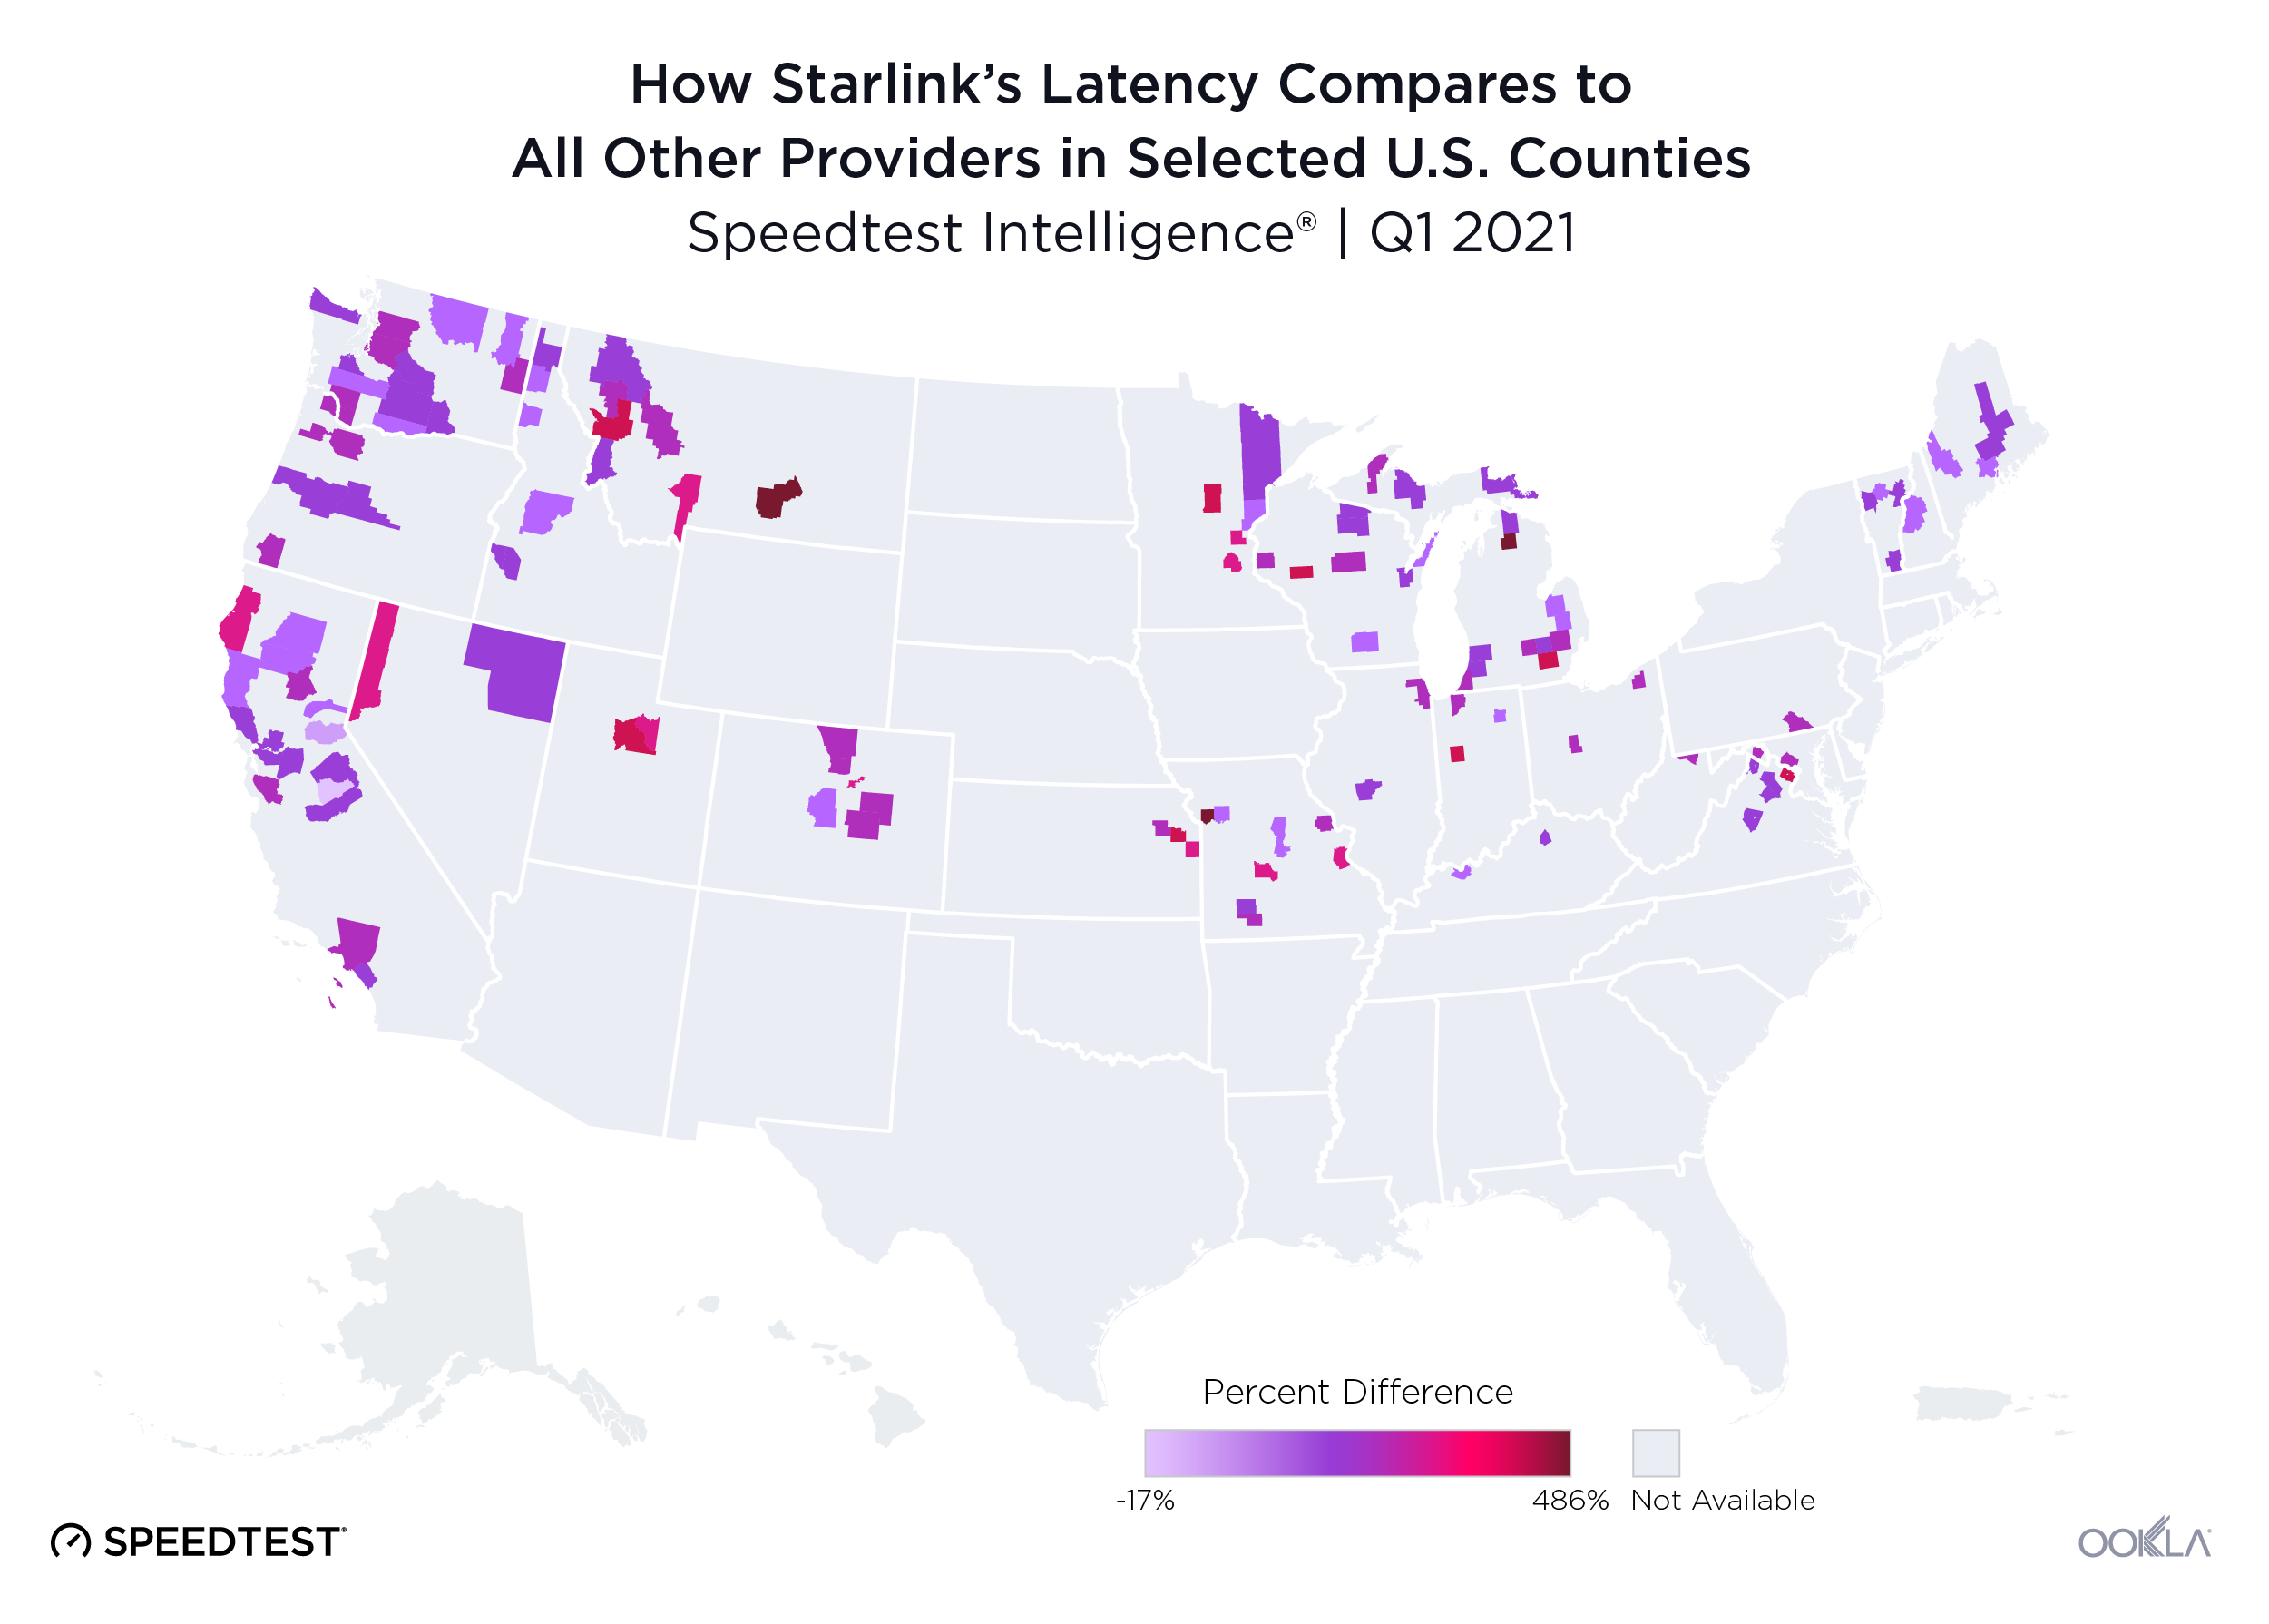 Nom : ookla_united_states_latency_comparison_starlink_map_0521-3.png
Affichages : 2794
Taille : 299,5 Ko